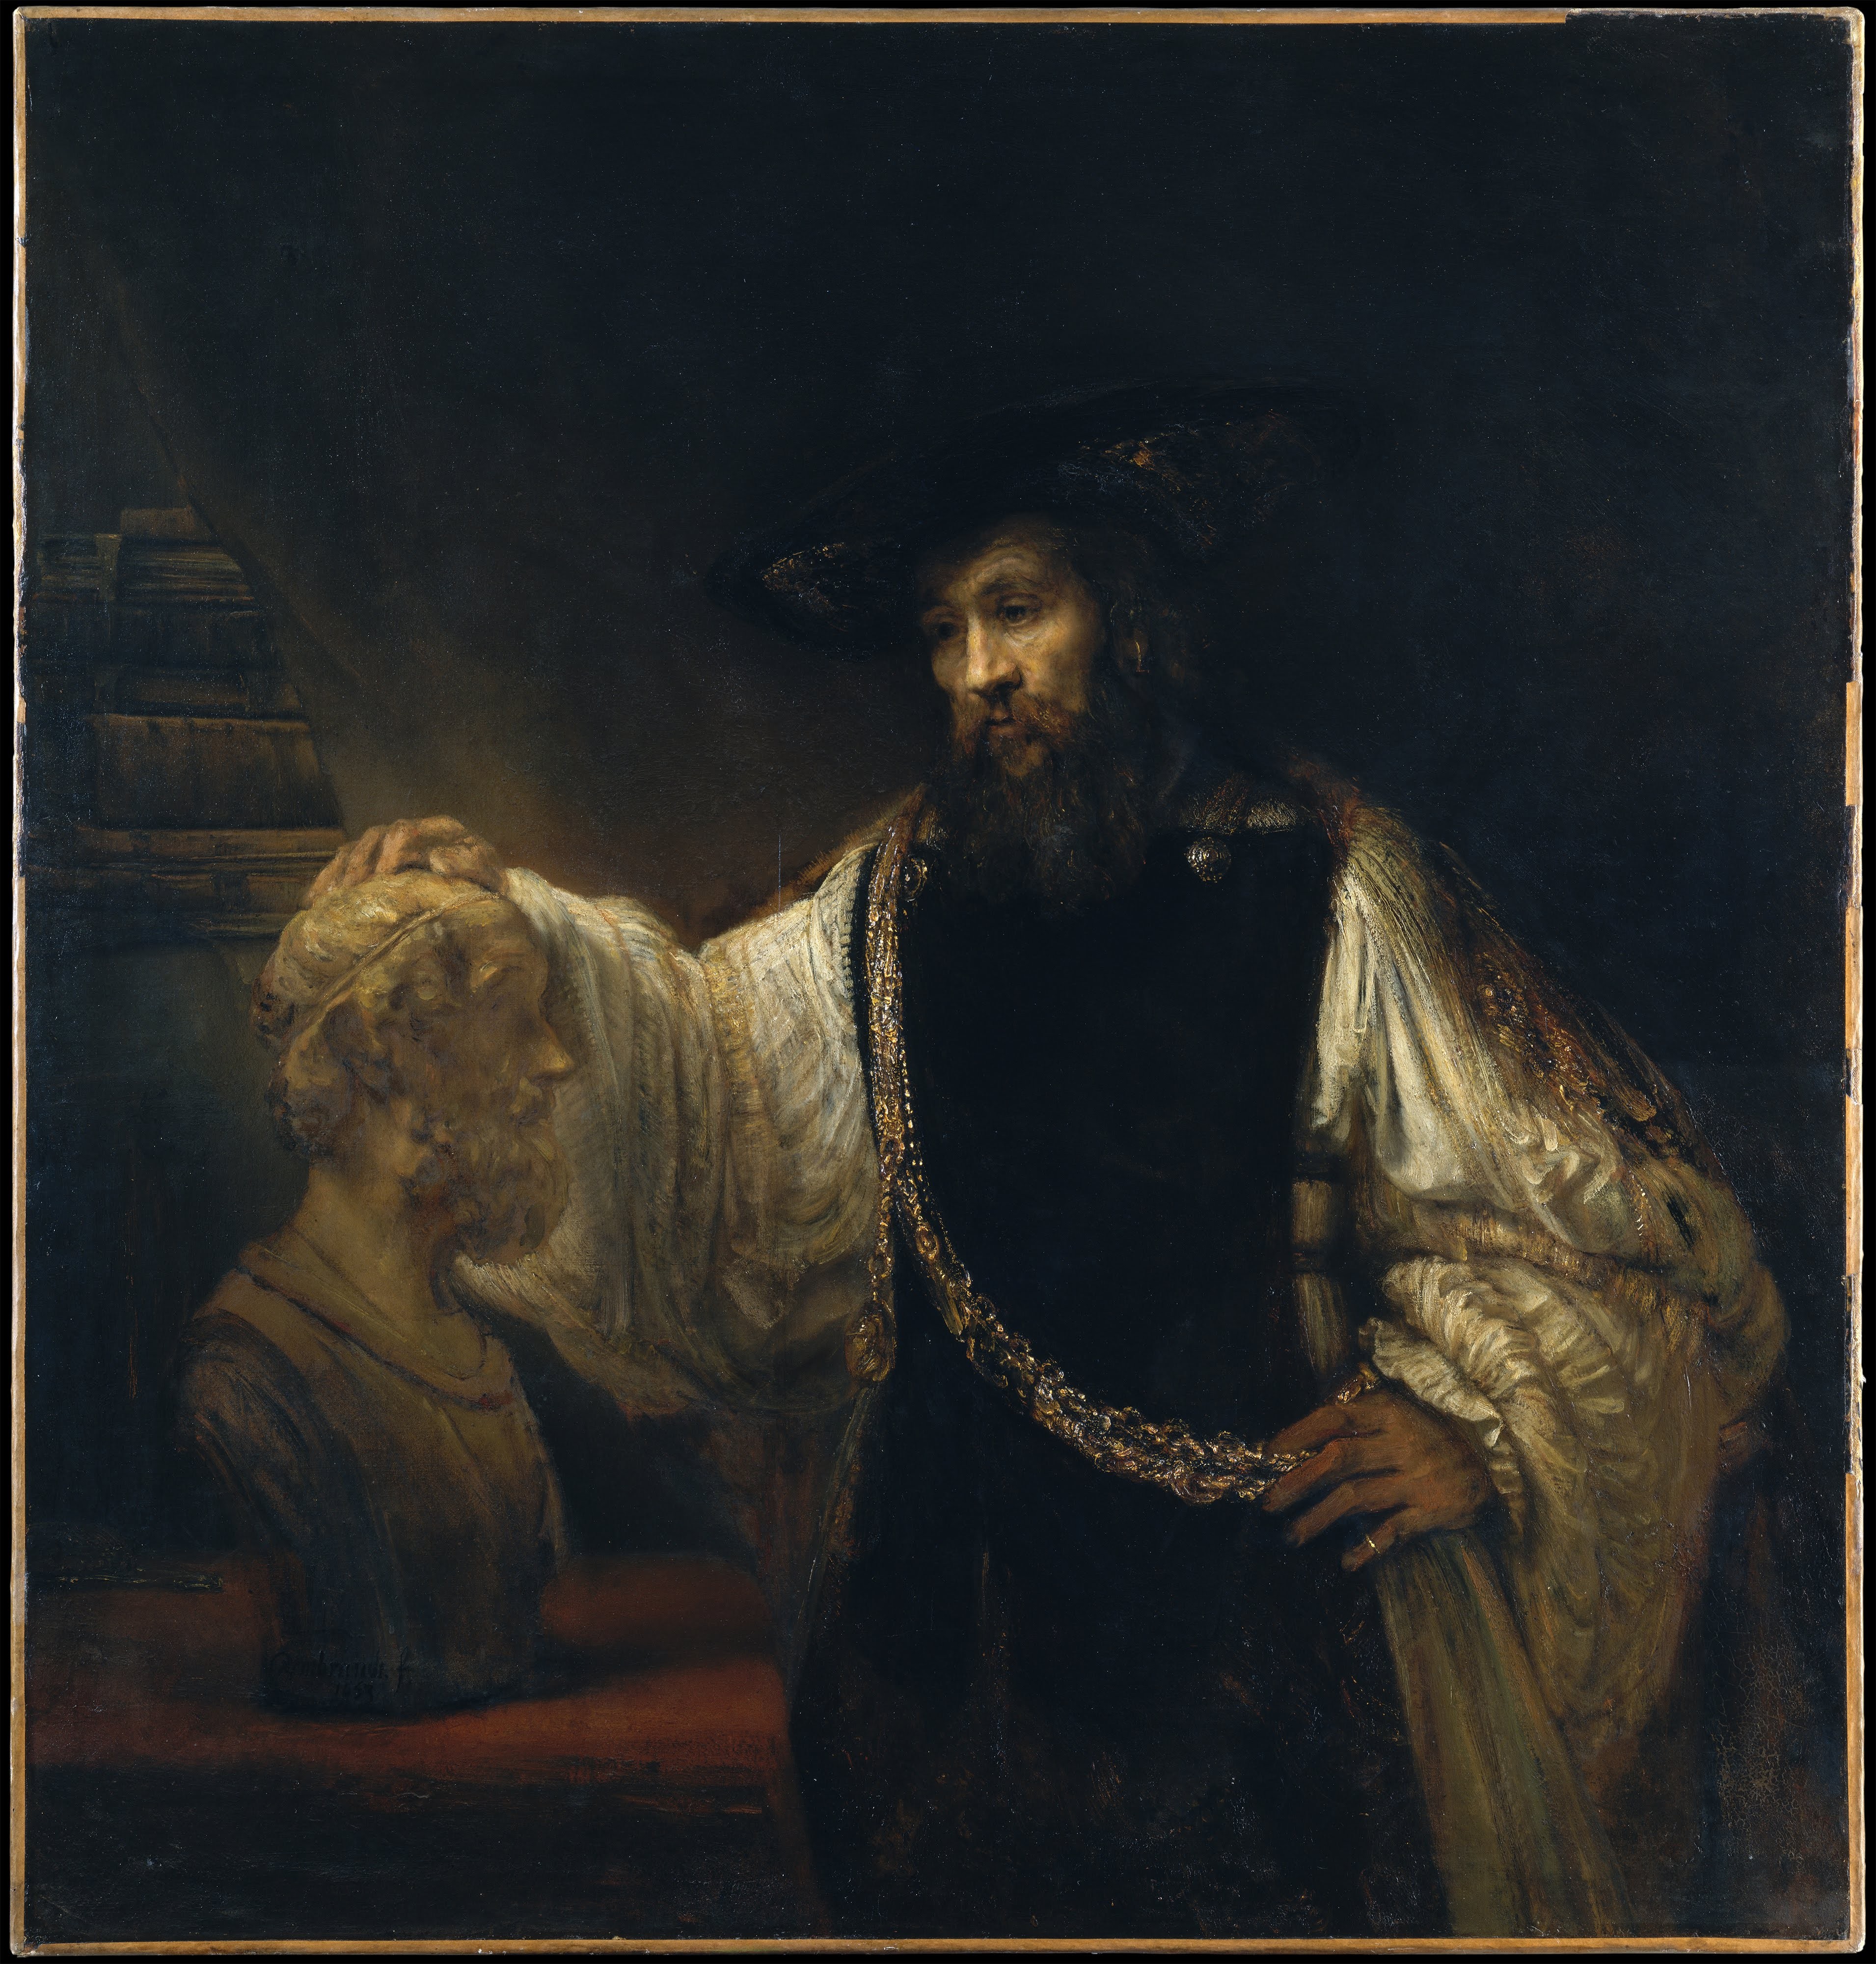 Rembrandt van Rijn, Classic art, Painting, History, Greek mythology, Aristotle with the Bust of Homer, Artwork Wallpaper